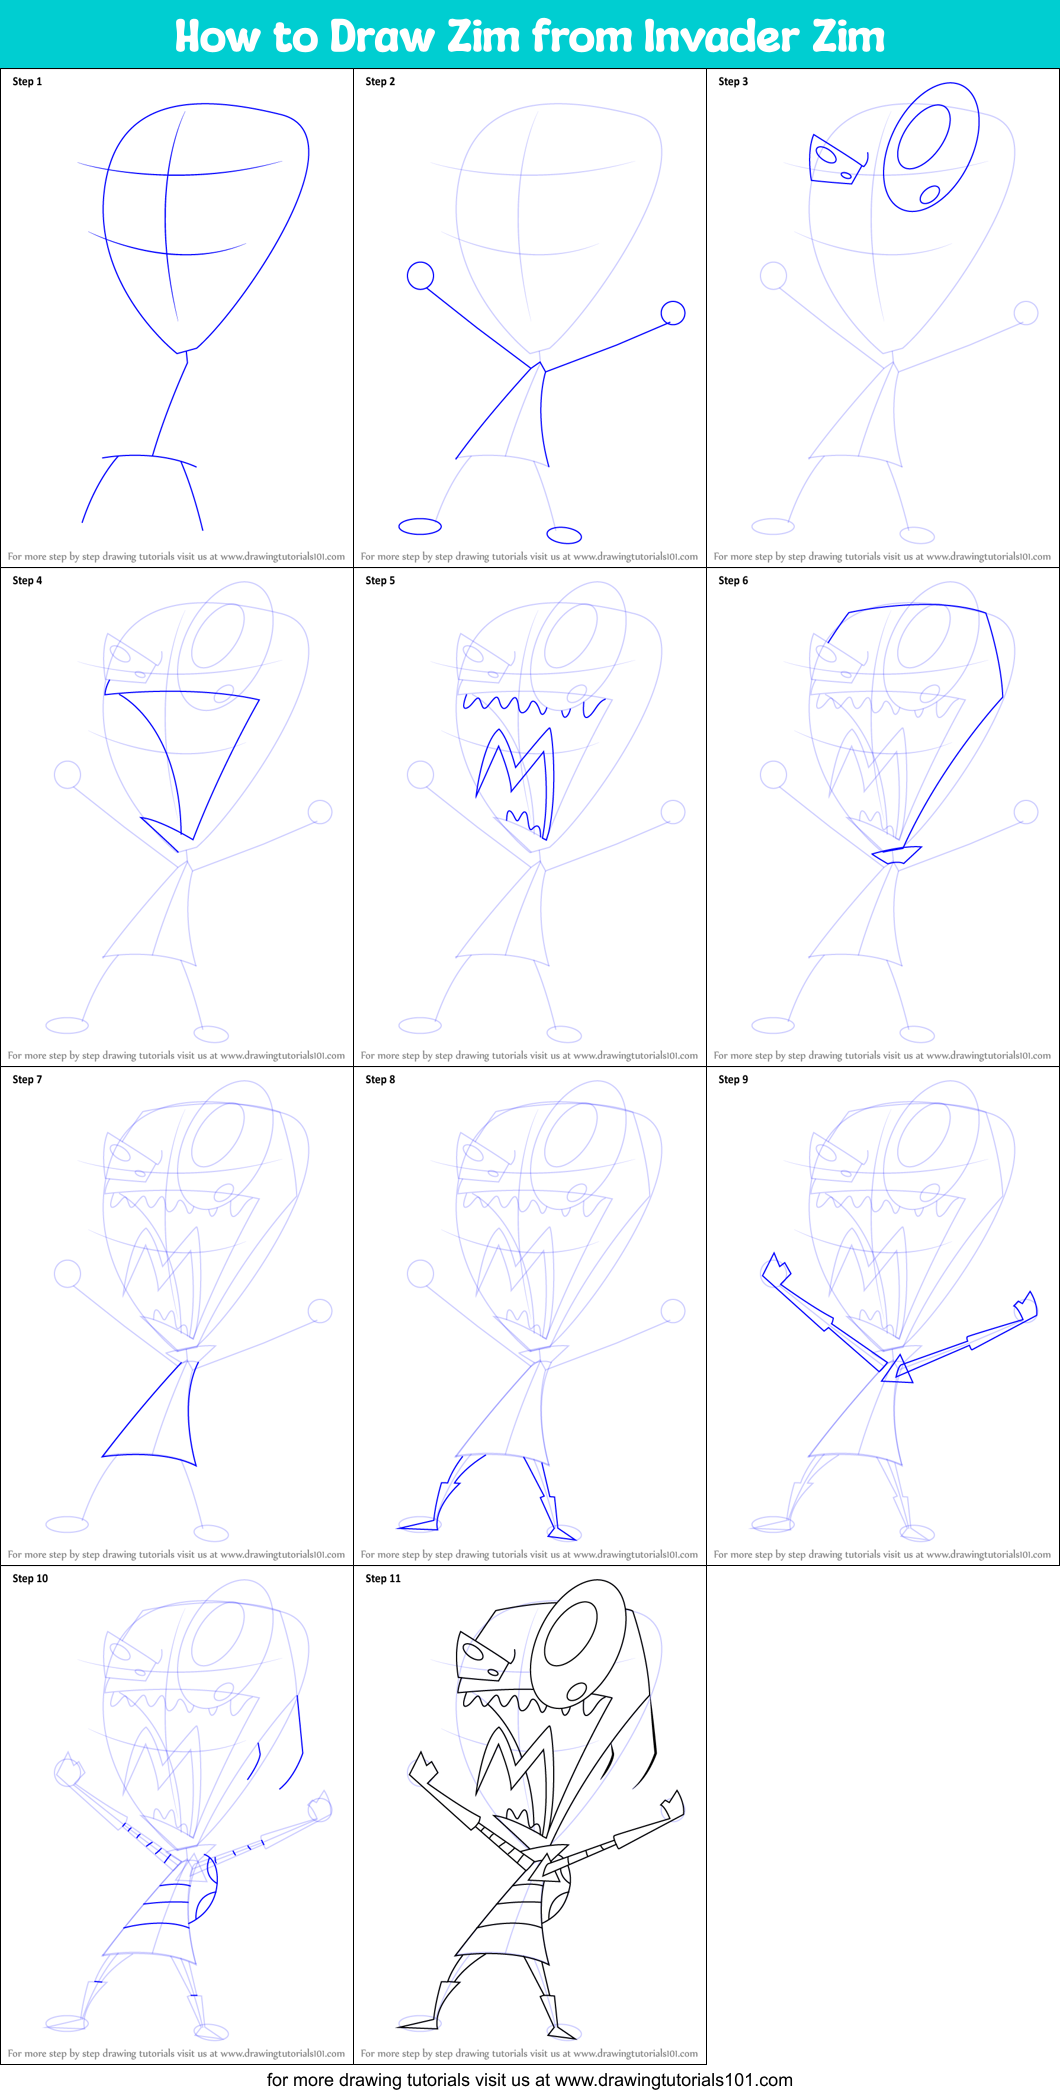 How to Draw Zim from Invader Zim printable step by step drawing sheet